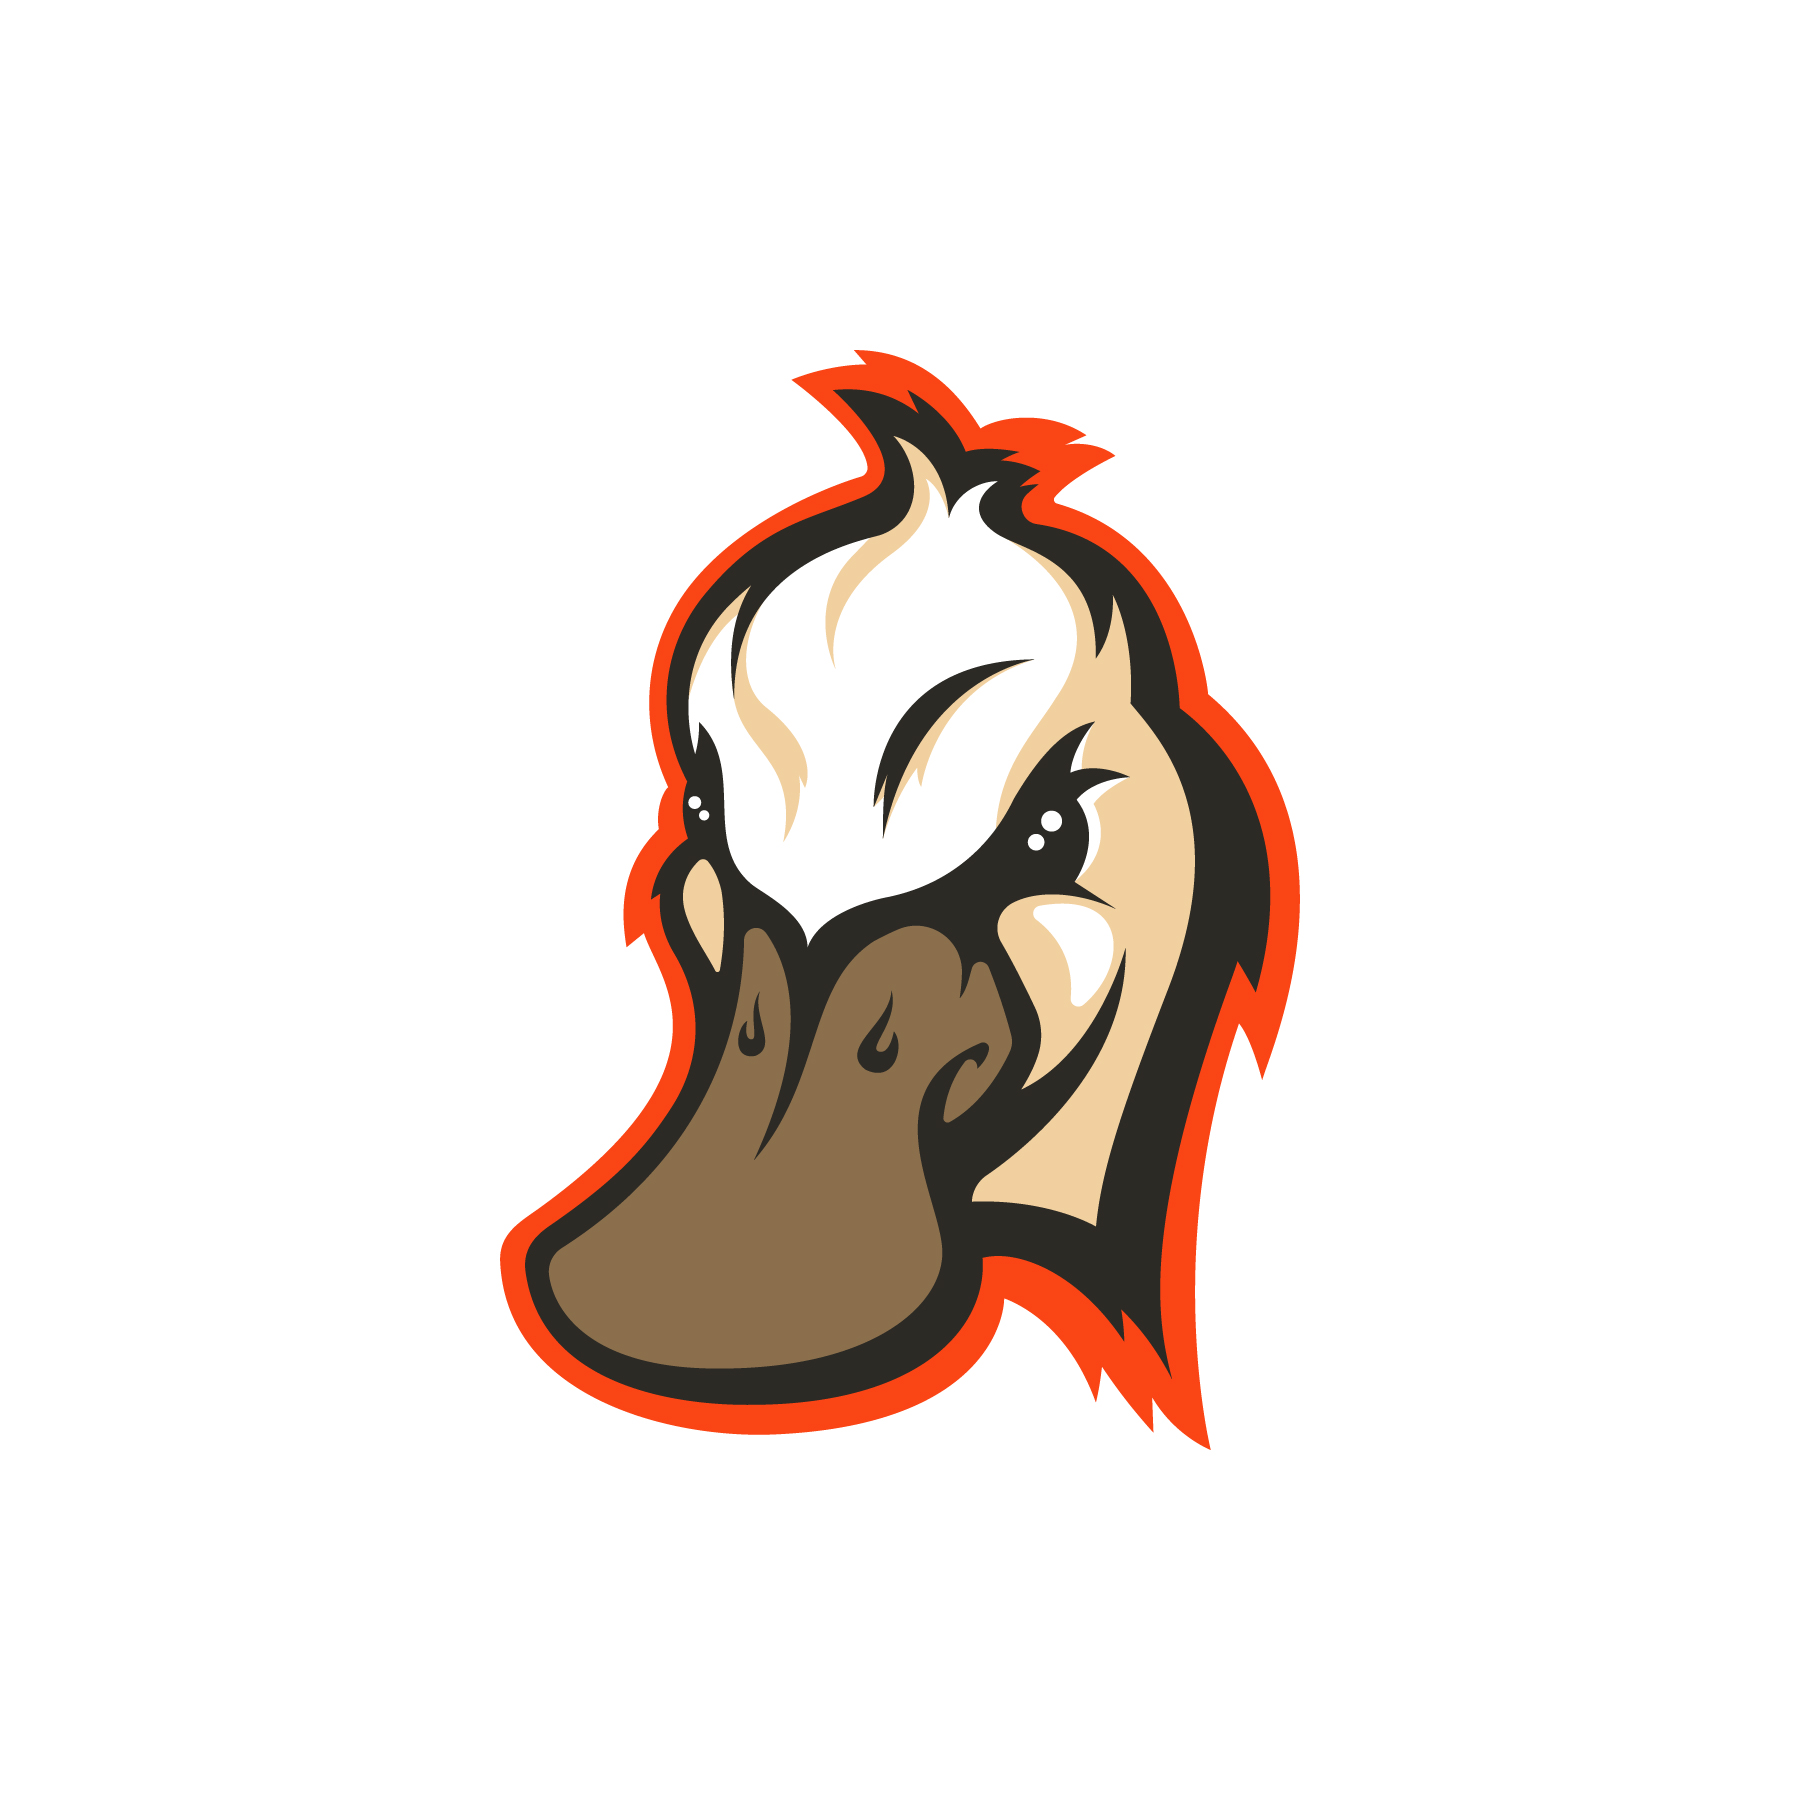 Utah Ducks Baseball Mascot logo design by logo designer Timothy Creative Department for your inspiration and for the worlds largest logo competition